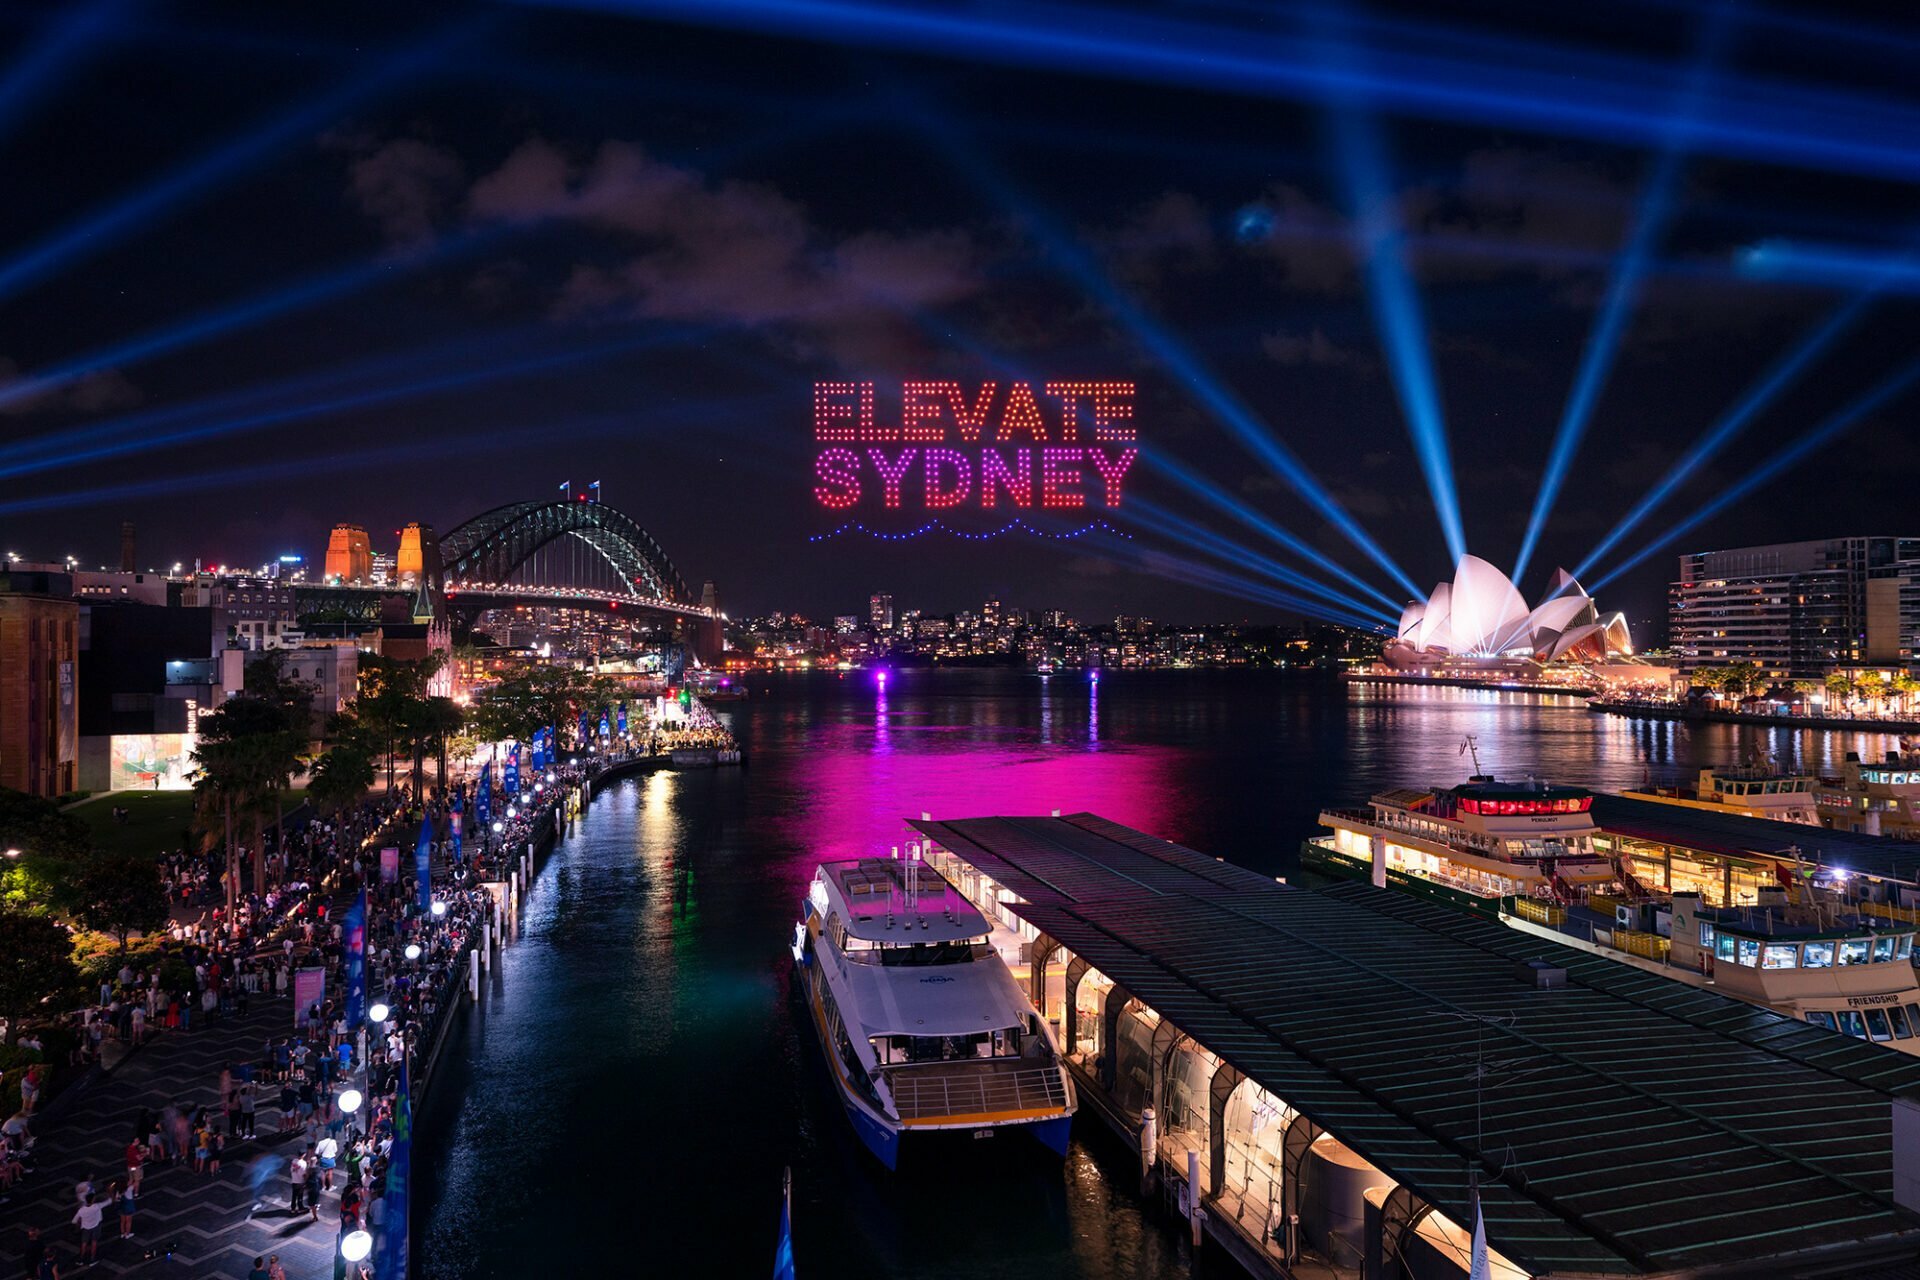 Watch Sky Show With 500 Choreographed Drones Over Sydney Cove 9314